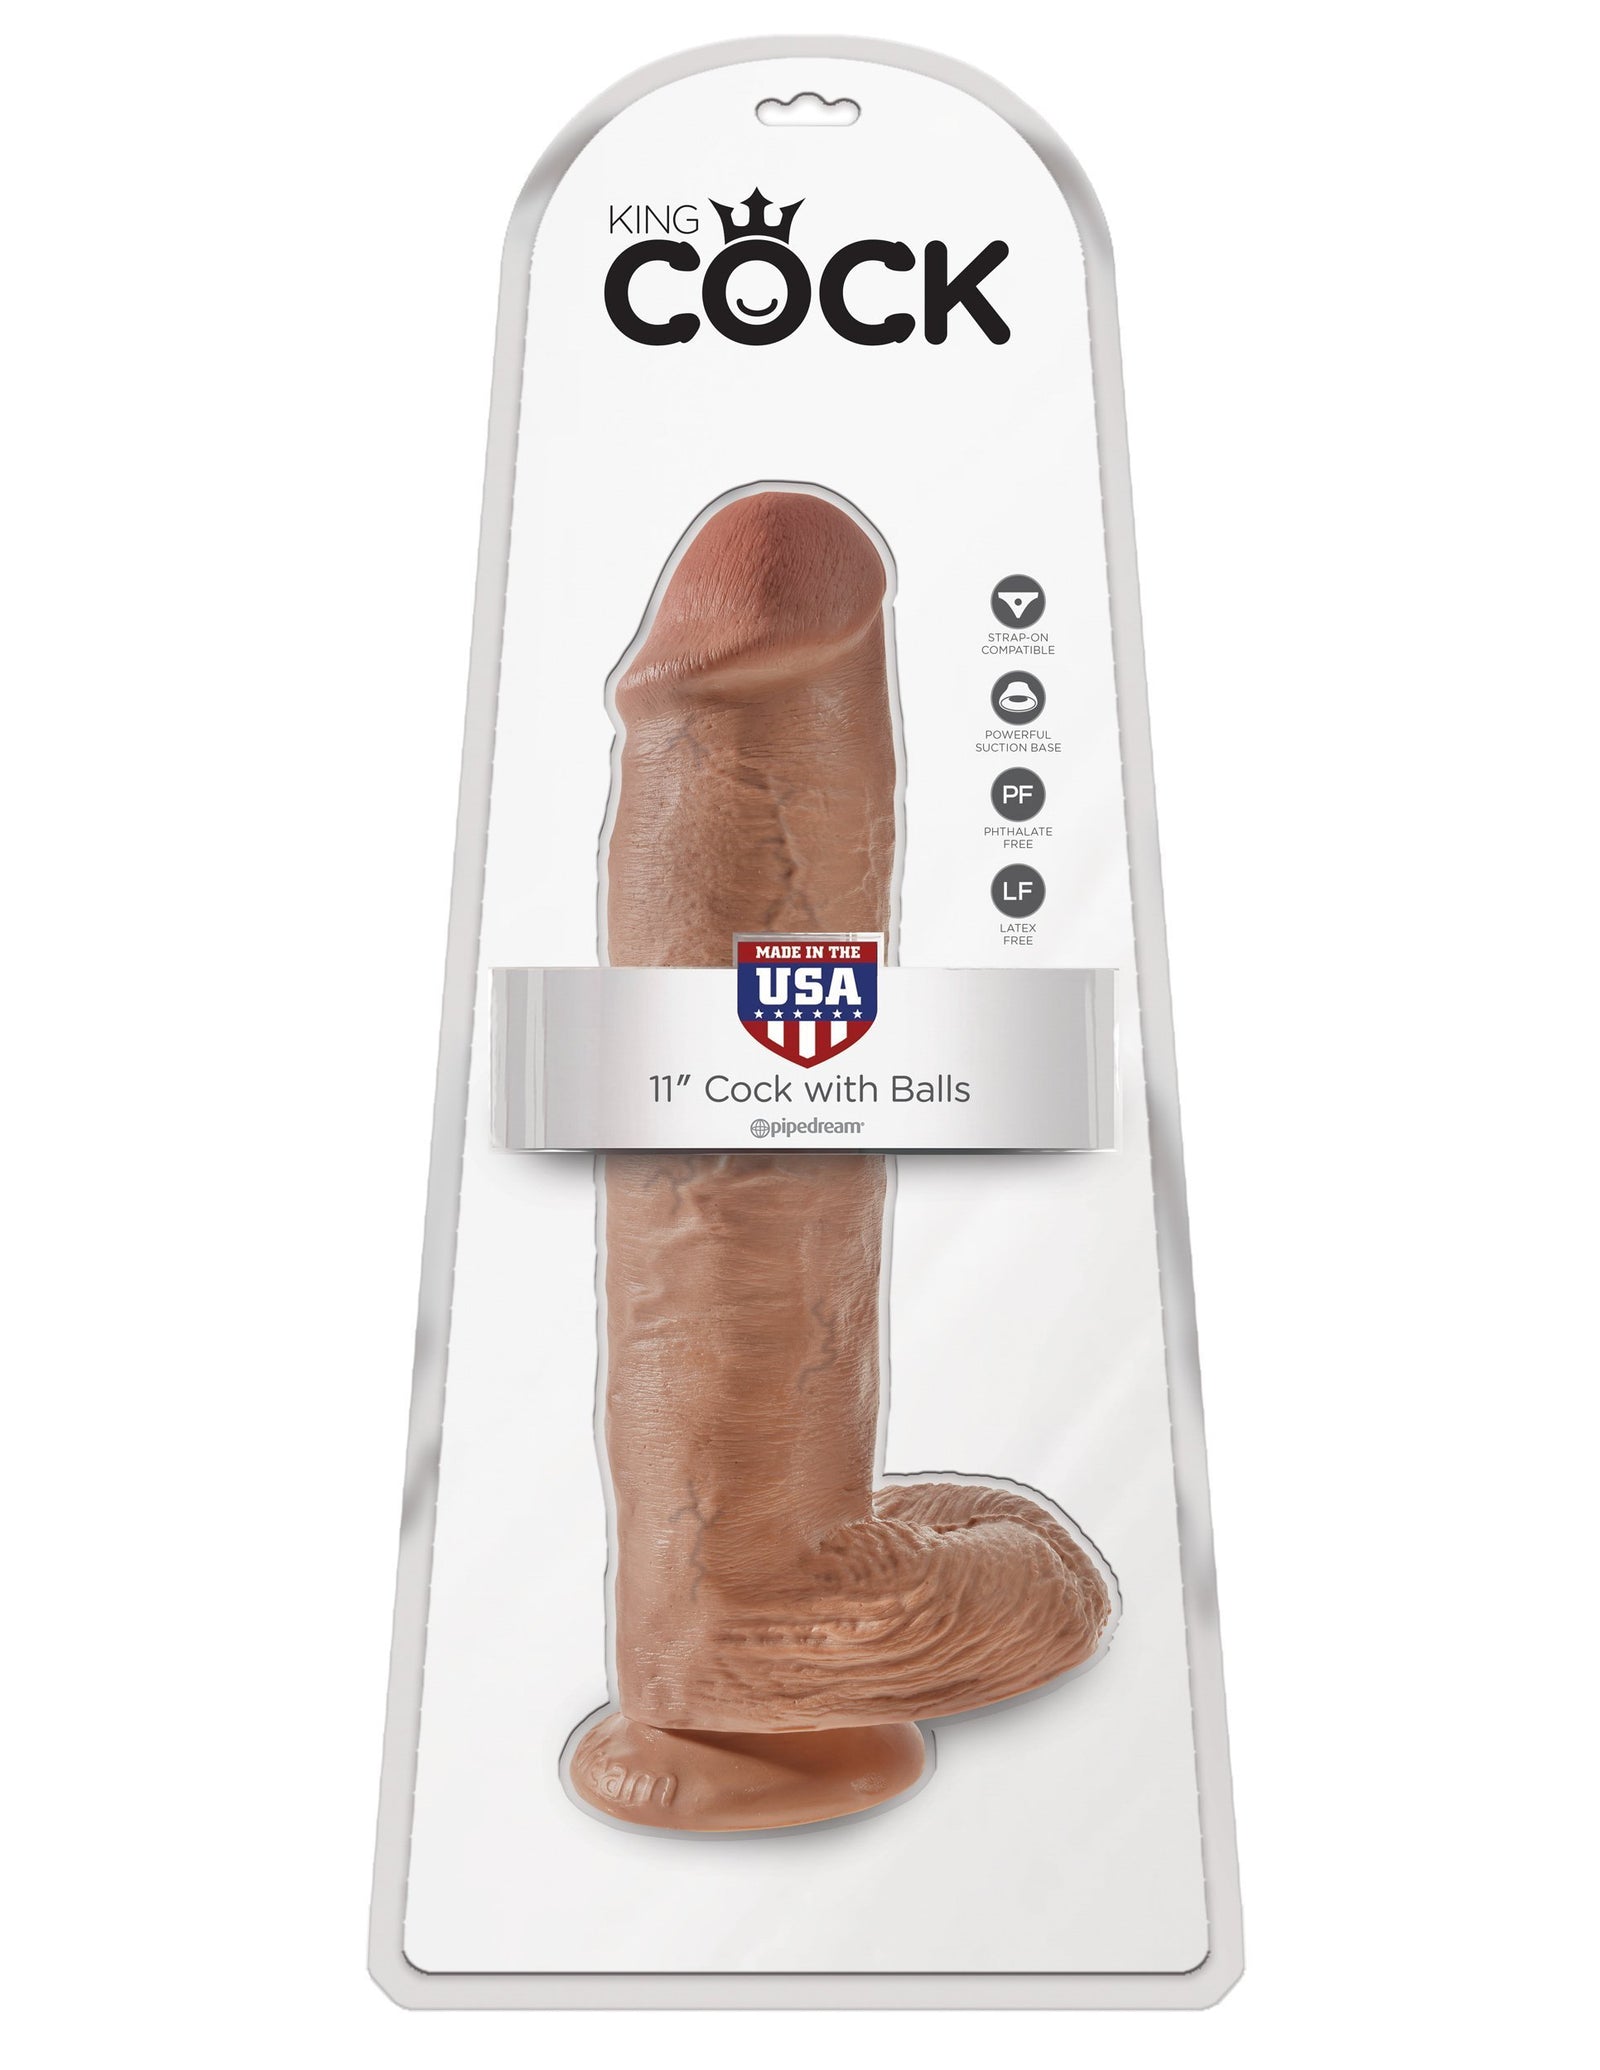 Pipedream - King Cock 11" Cock with Balls (Brown) Realistic Dildo with suction cup (Non Vibration) Singapore